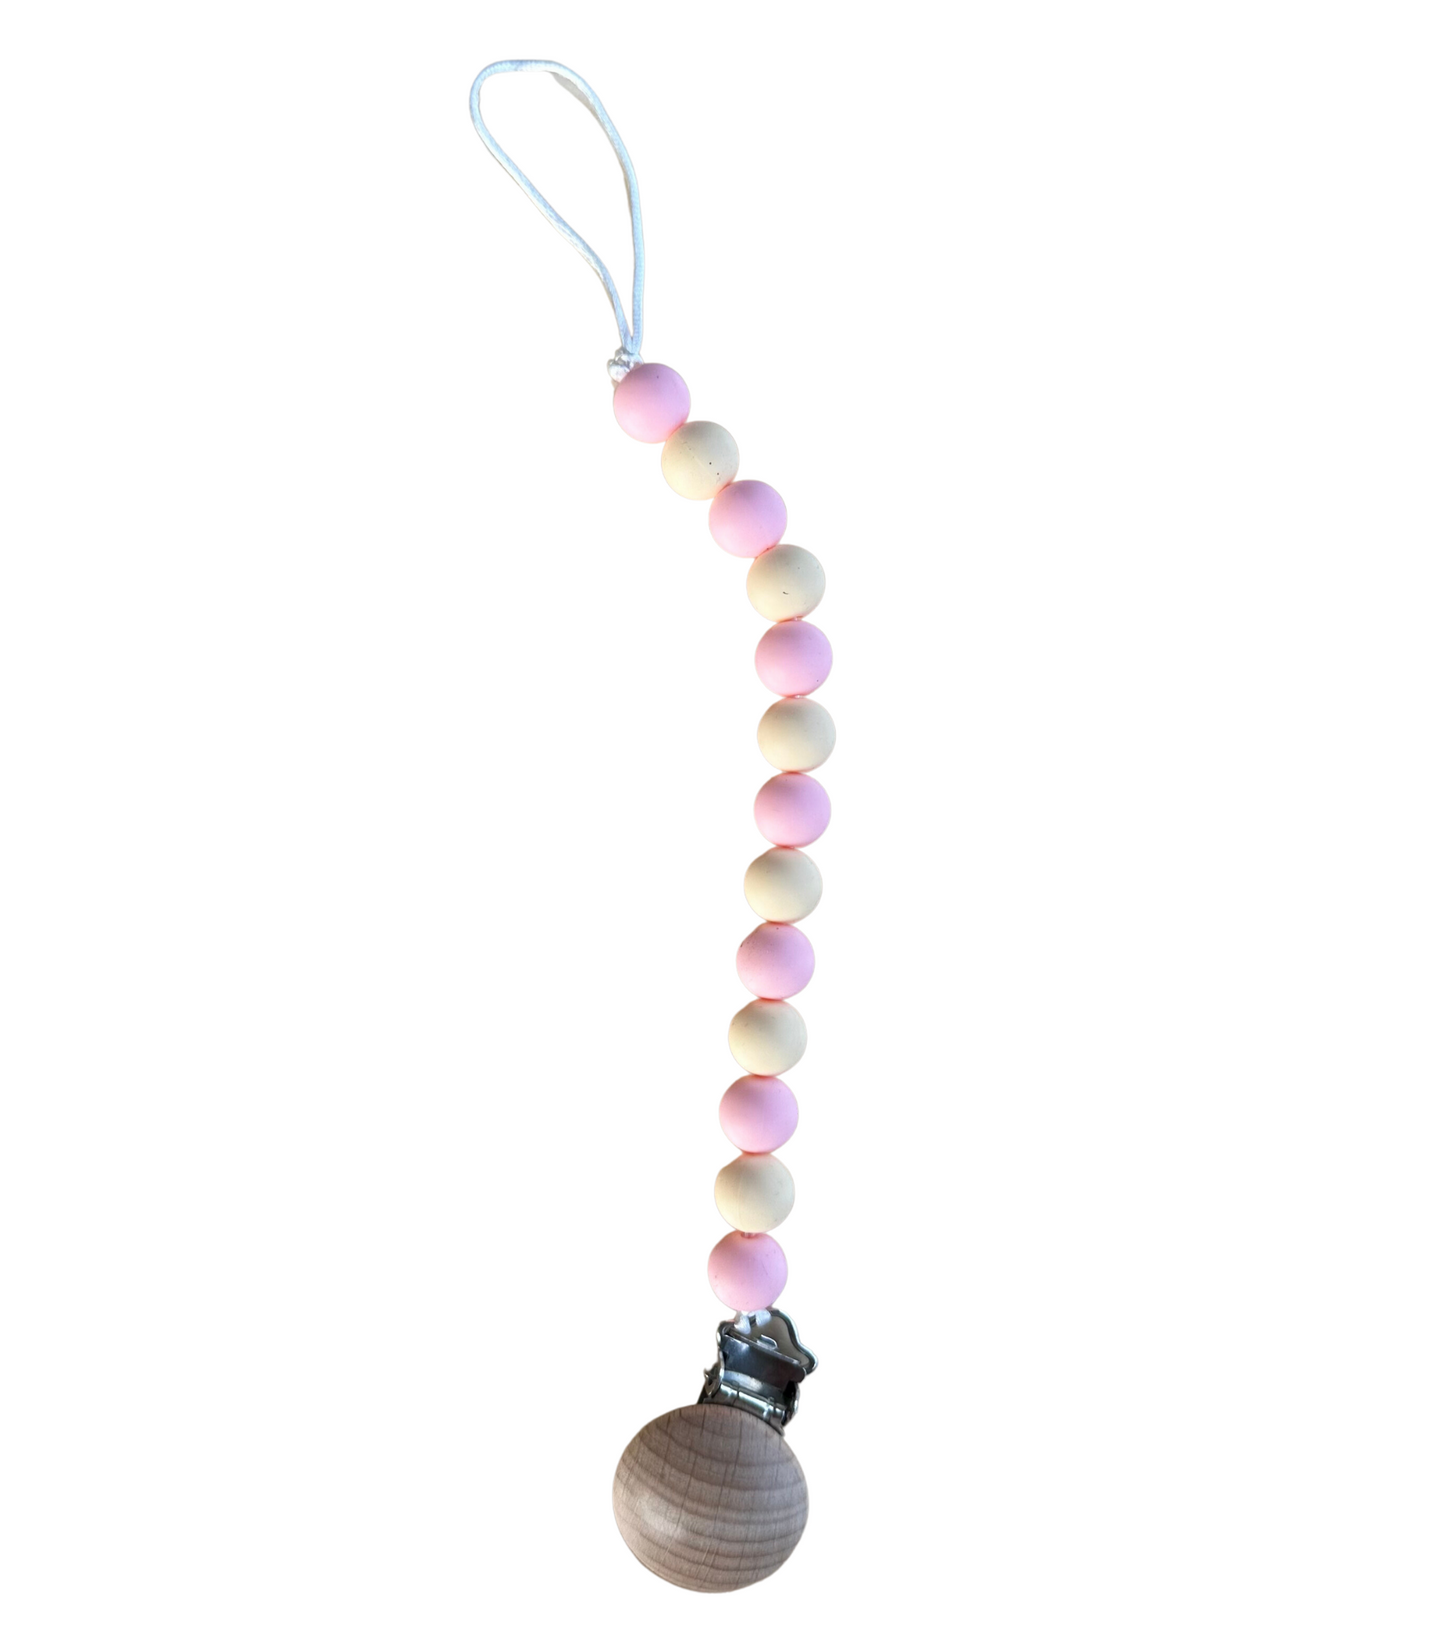 Beaded Pacifier Clips